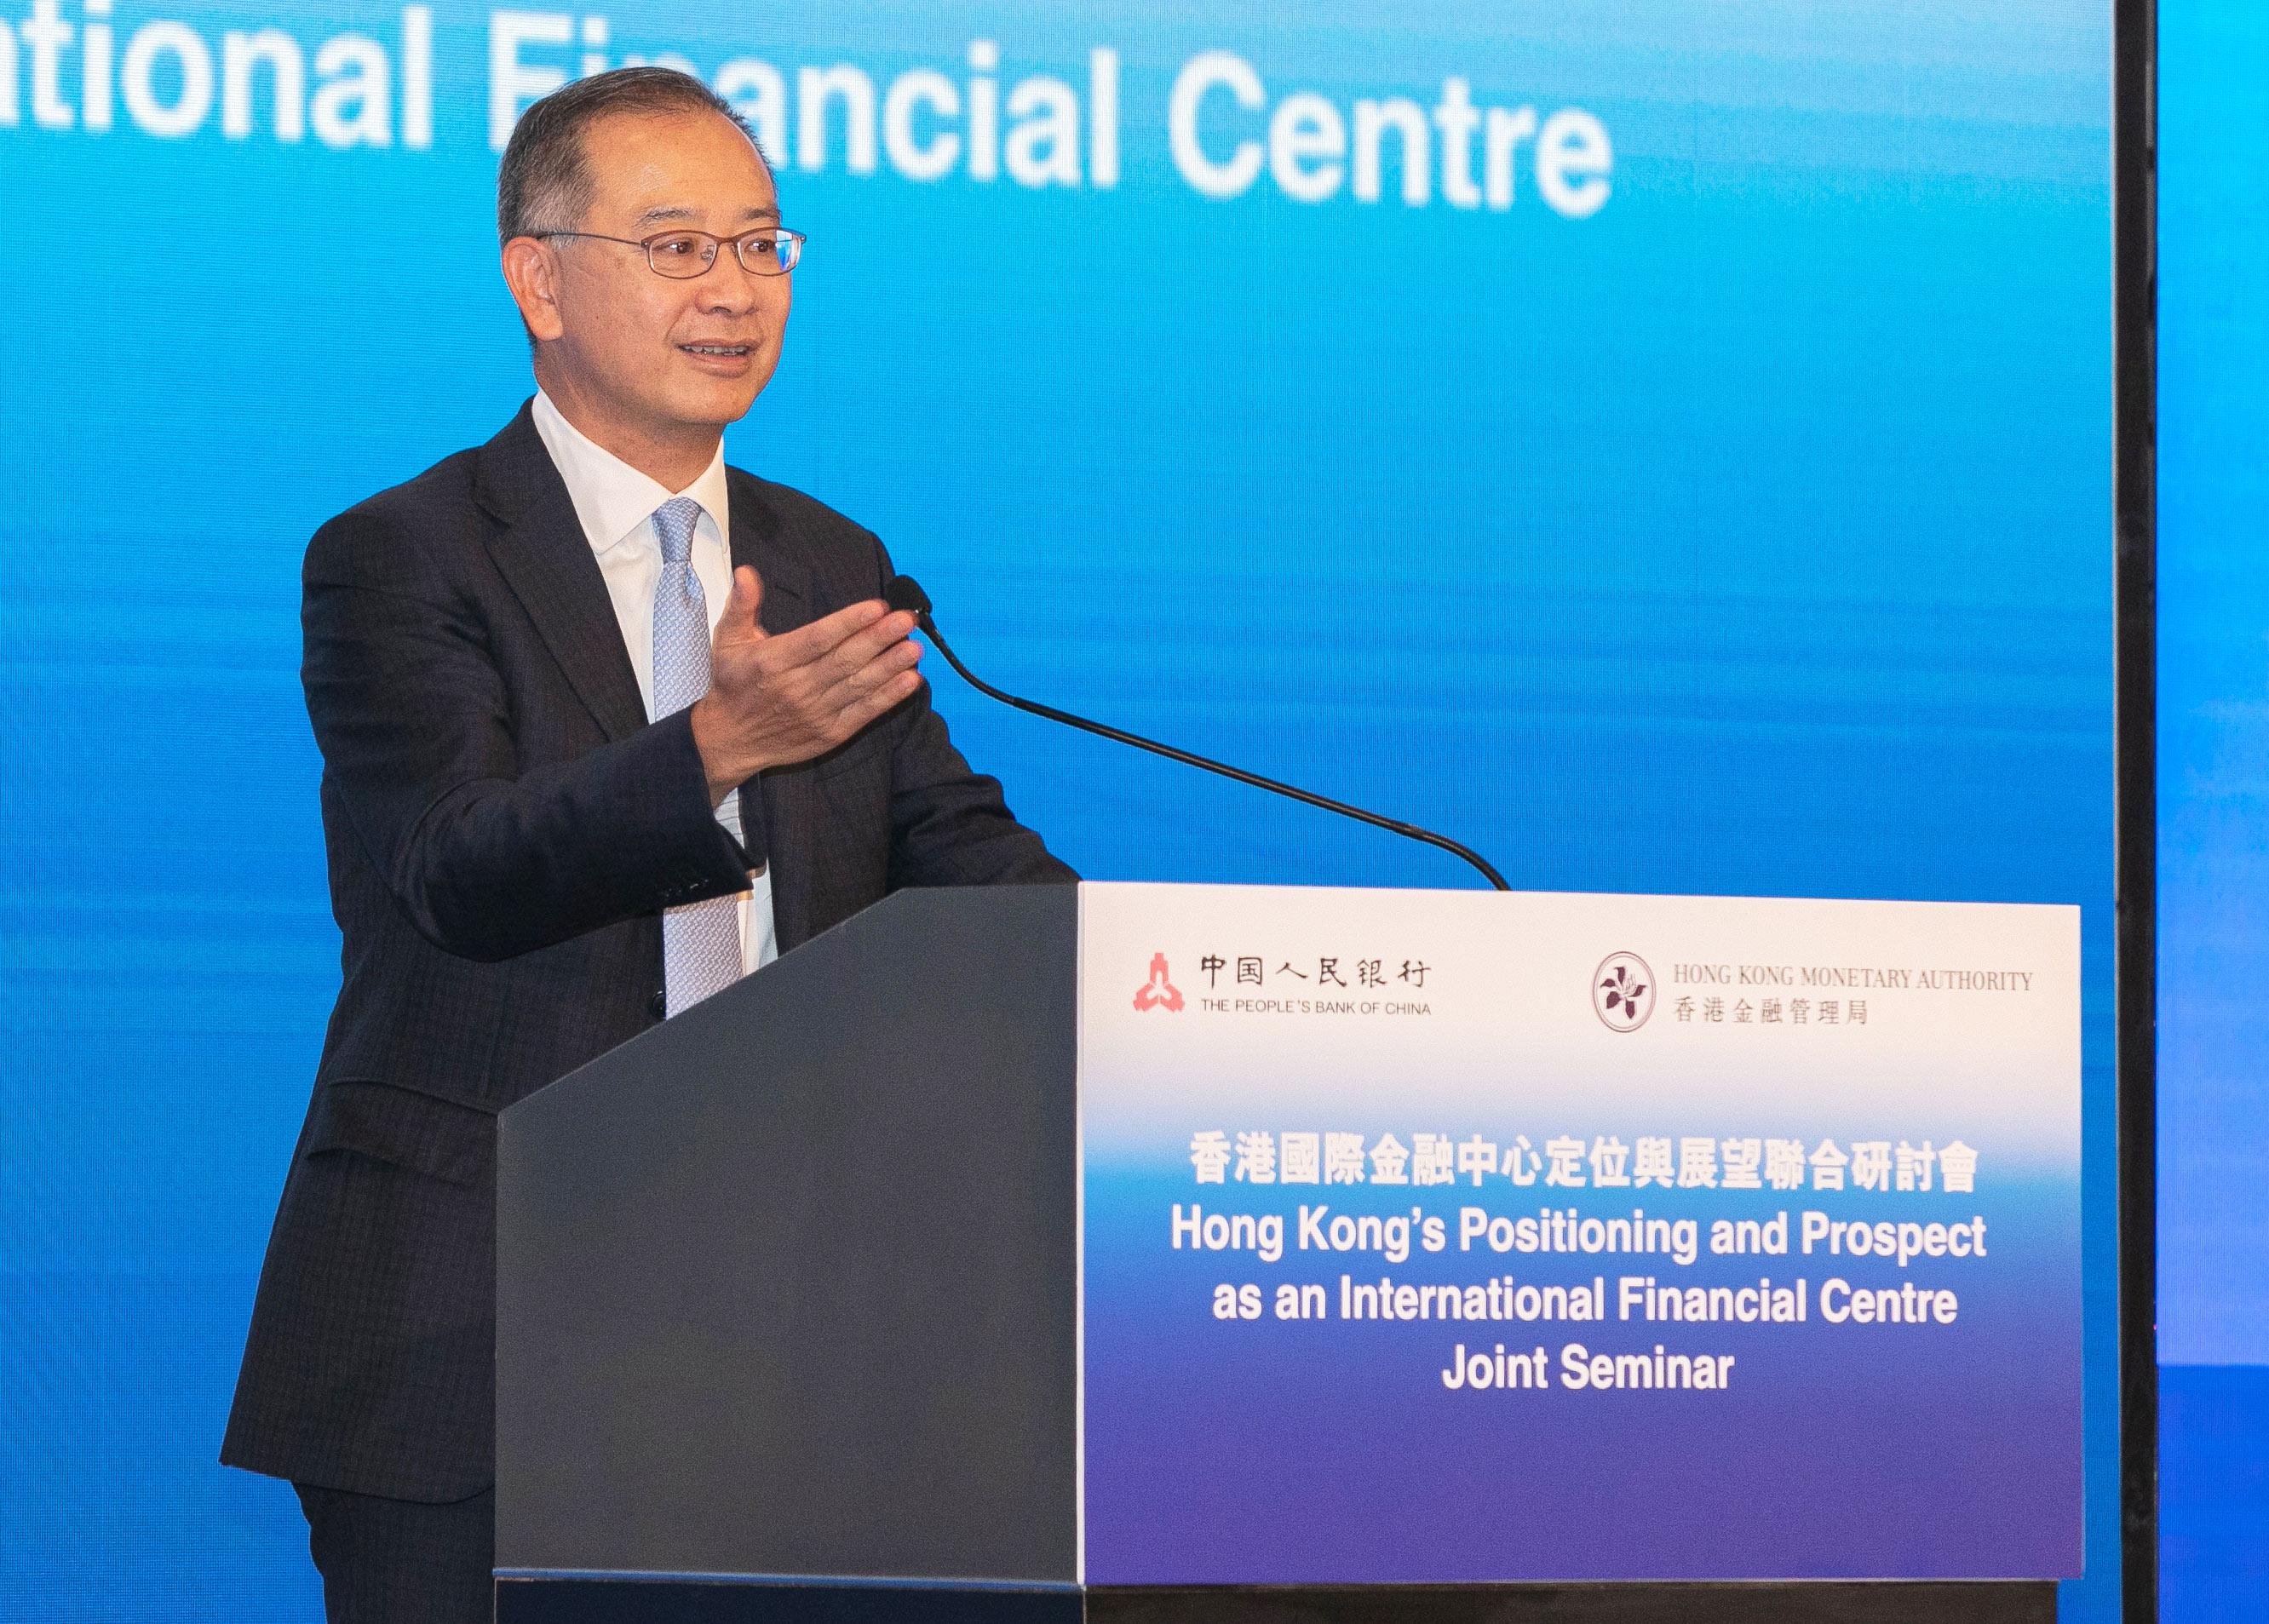 The Chief Executive of the Hong Kong Monetary Authority, Mr Eddie Yue, delivered opening remarks at the seminar on "Hong Kong's Positioning and Prospect as an International Financial Centre" on December 9 and reiterated that as a leading international financial centre, Hong Kong will leverage its unique edges to strive for breakthroughs and developments across various segments of the financial sector.